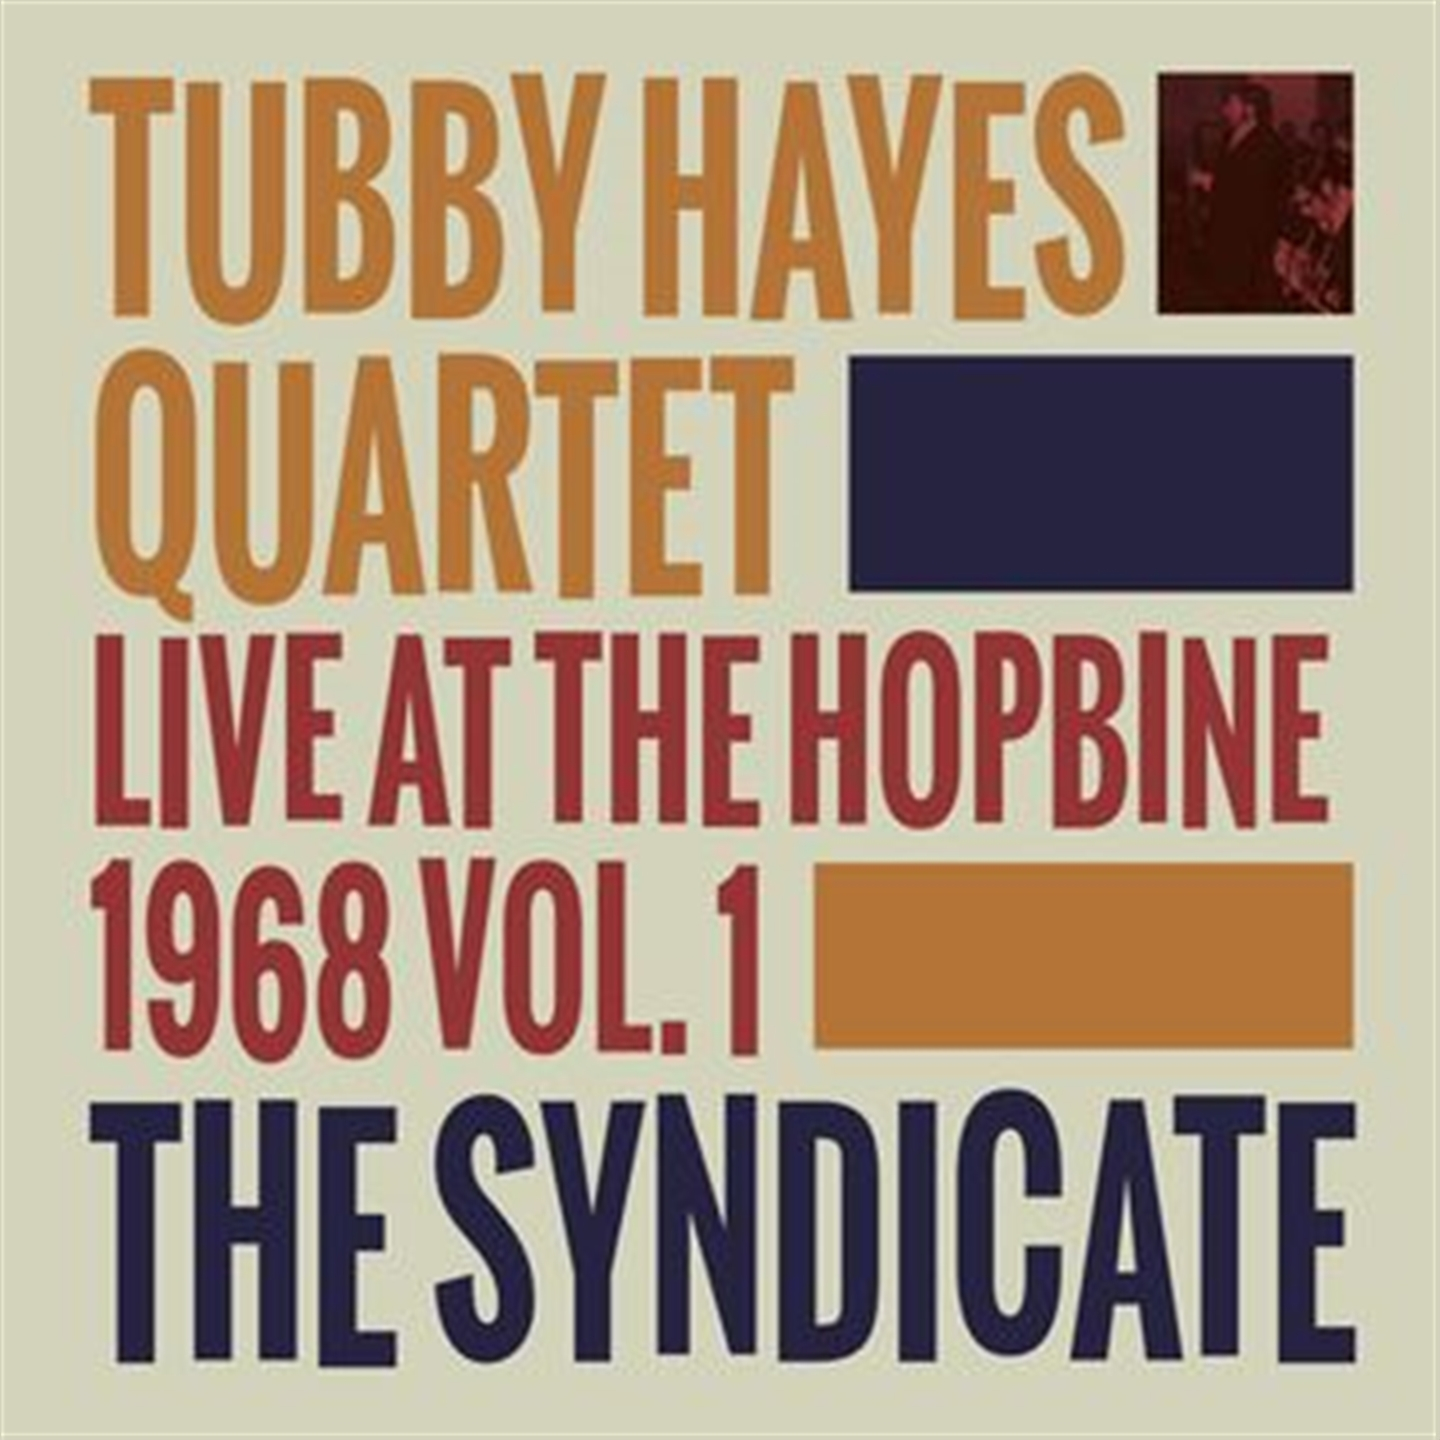 THE SYNDICATE : LIVE AT THE HOPBINE 1968